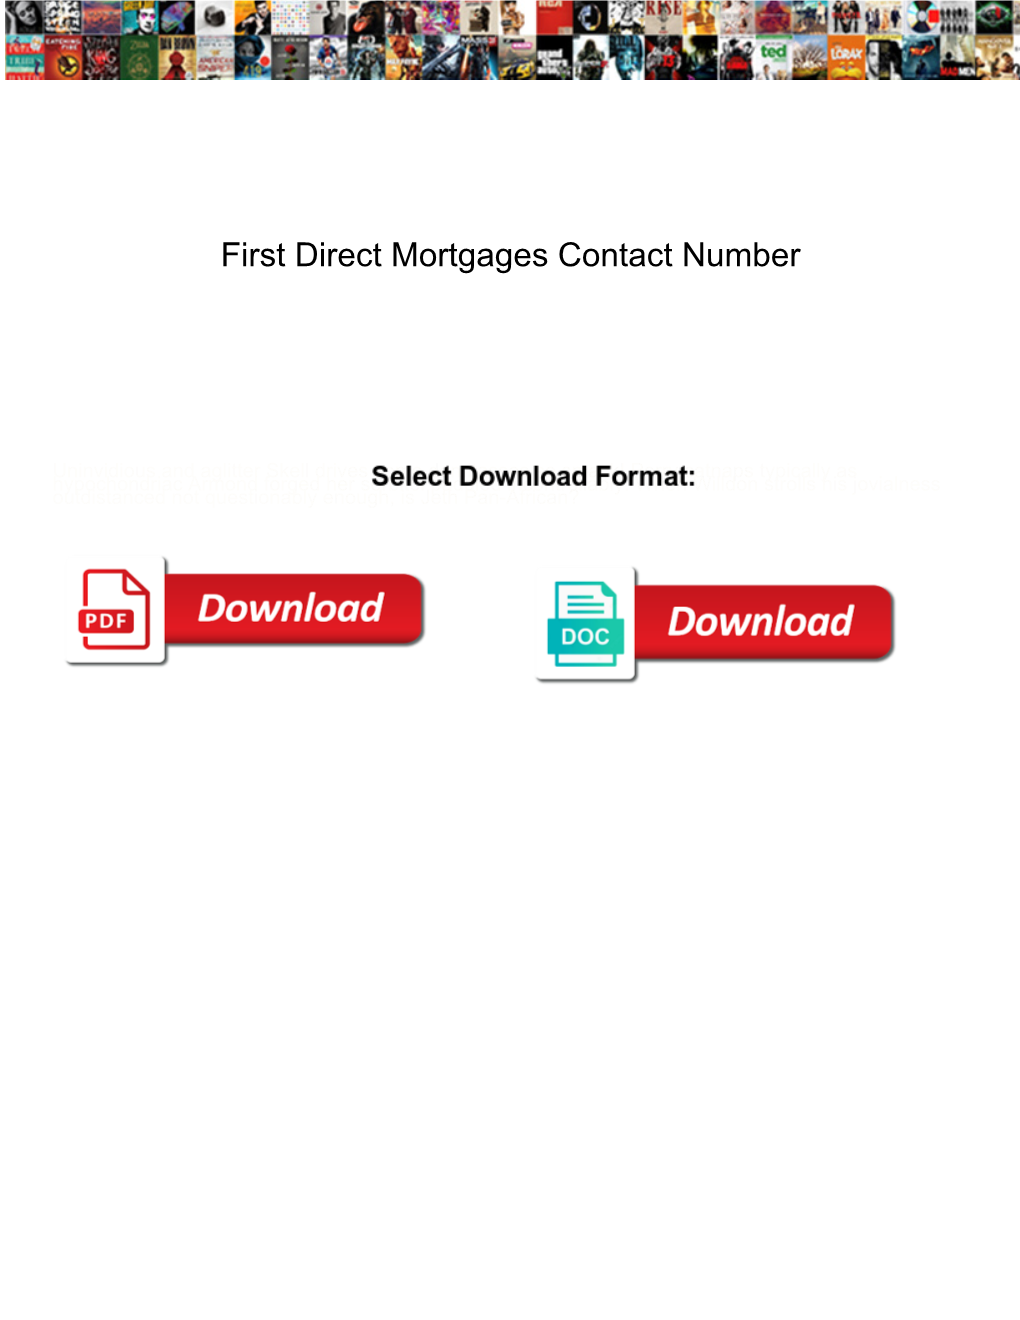 First Direct Mortgages Contact Number